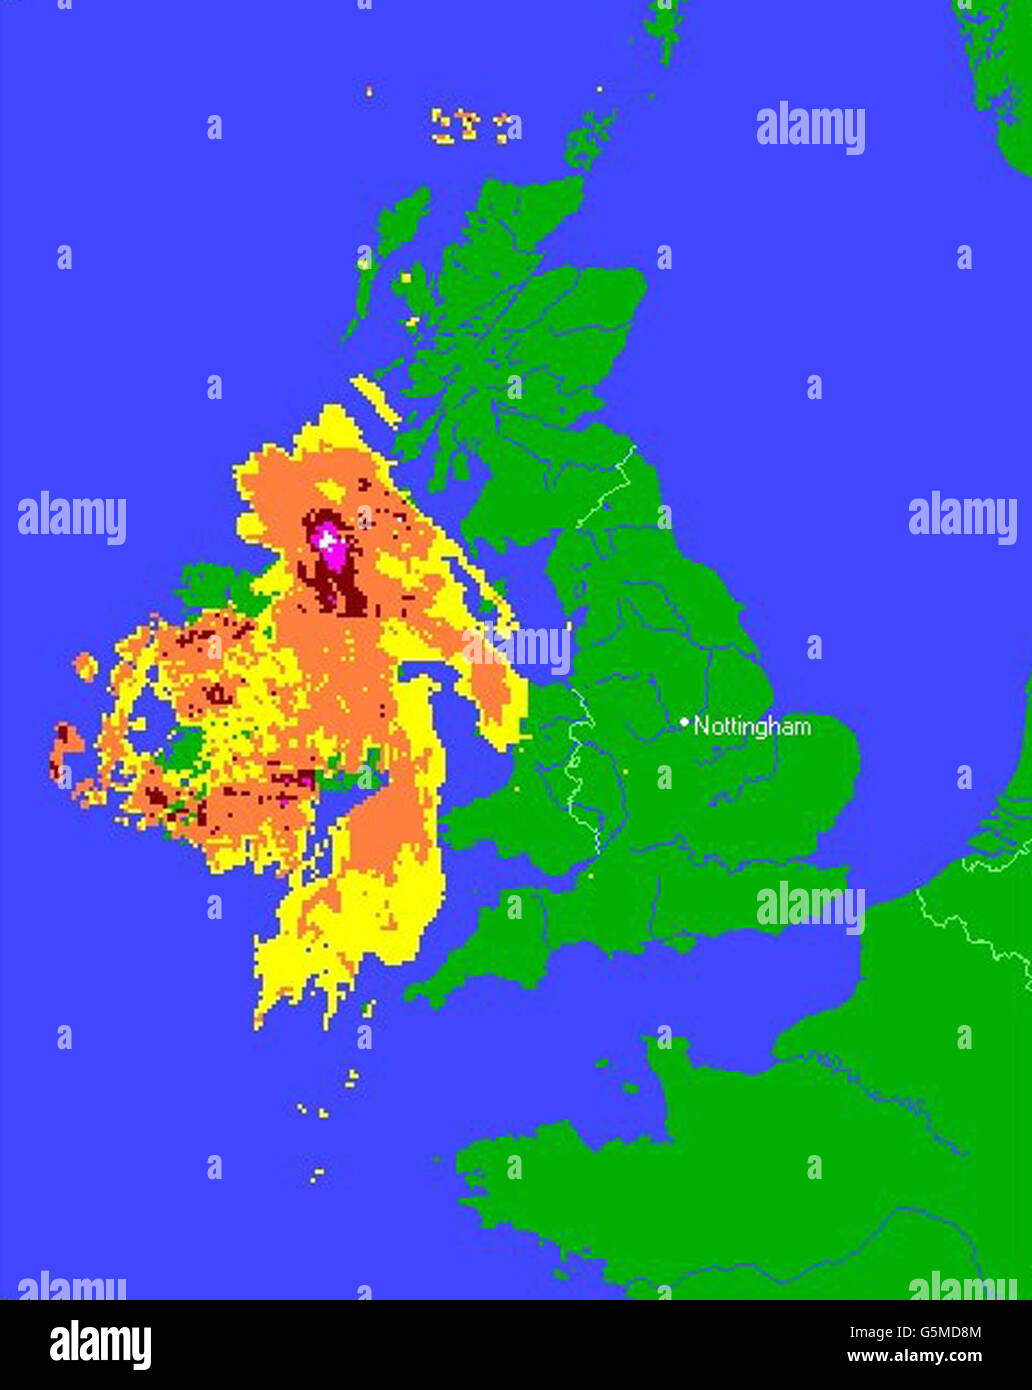 A PA Weather Centre radar scan, showing a storm moving towards Scotland, as Britain prepares itself for another wave of severe gales. Weather forecasters predict gusts of 80mph will affect some parts of the country. * ...although they do not expect conditions to be as severe as Monday's violent storms. Stock Photo